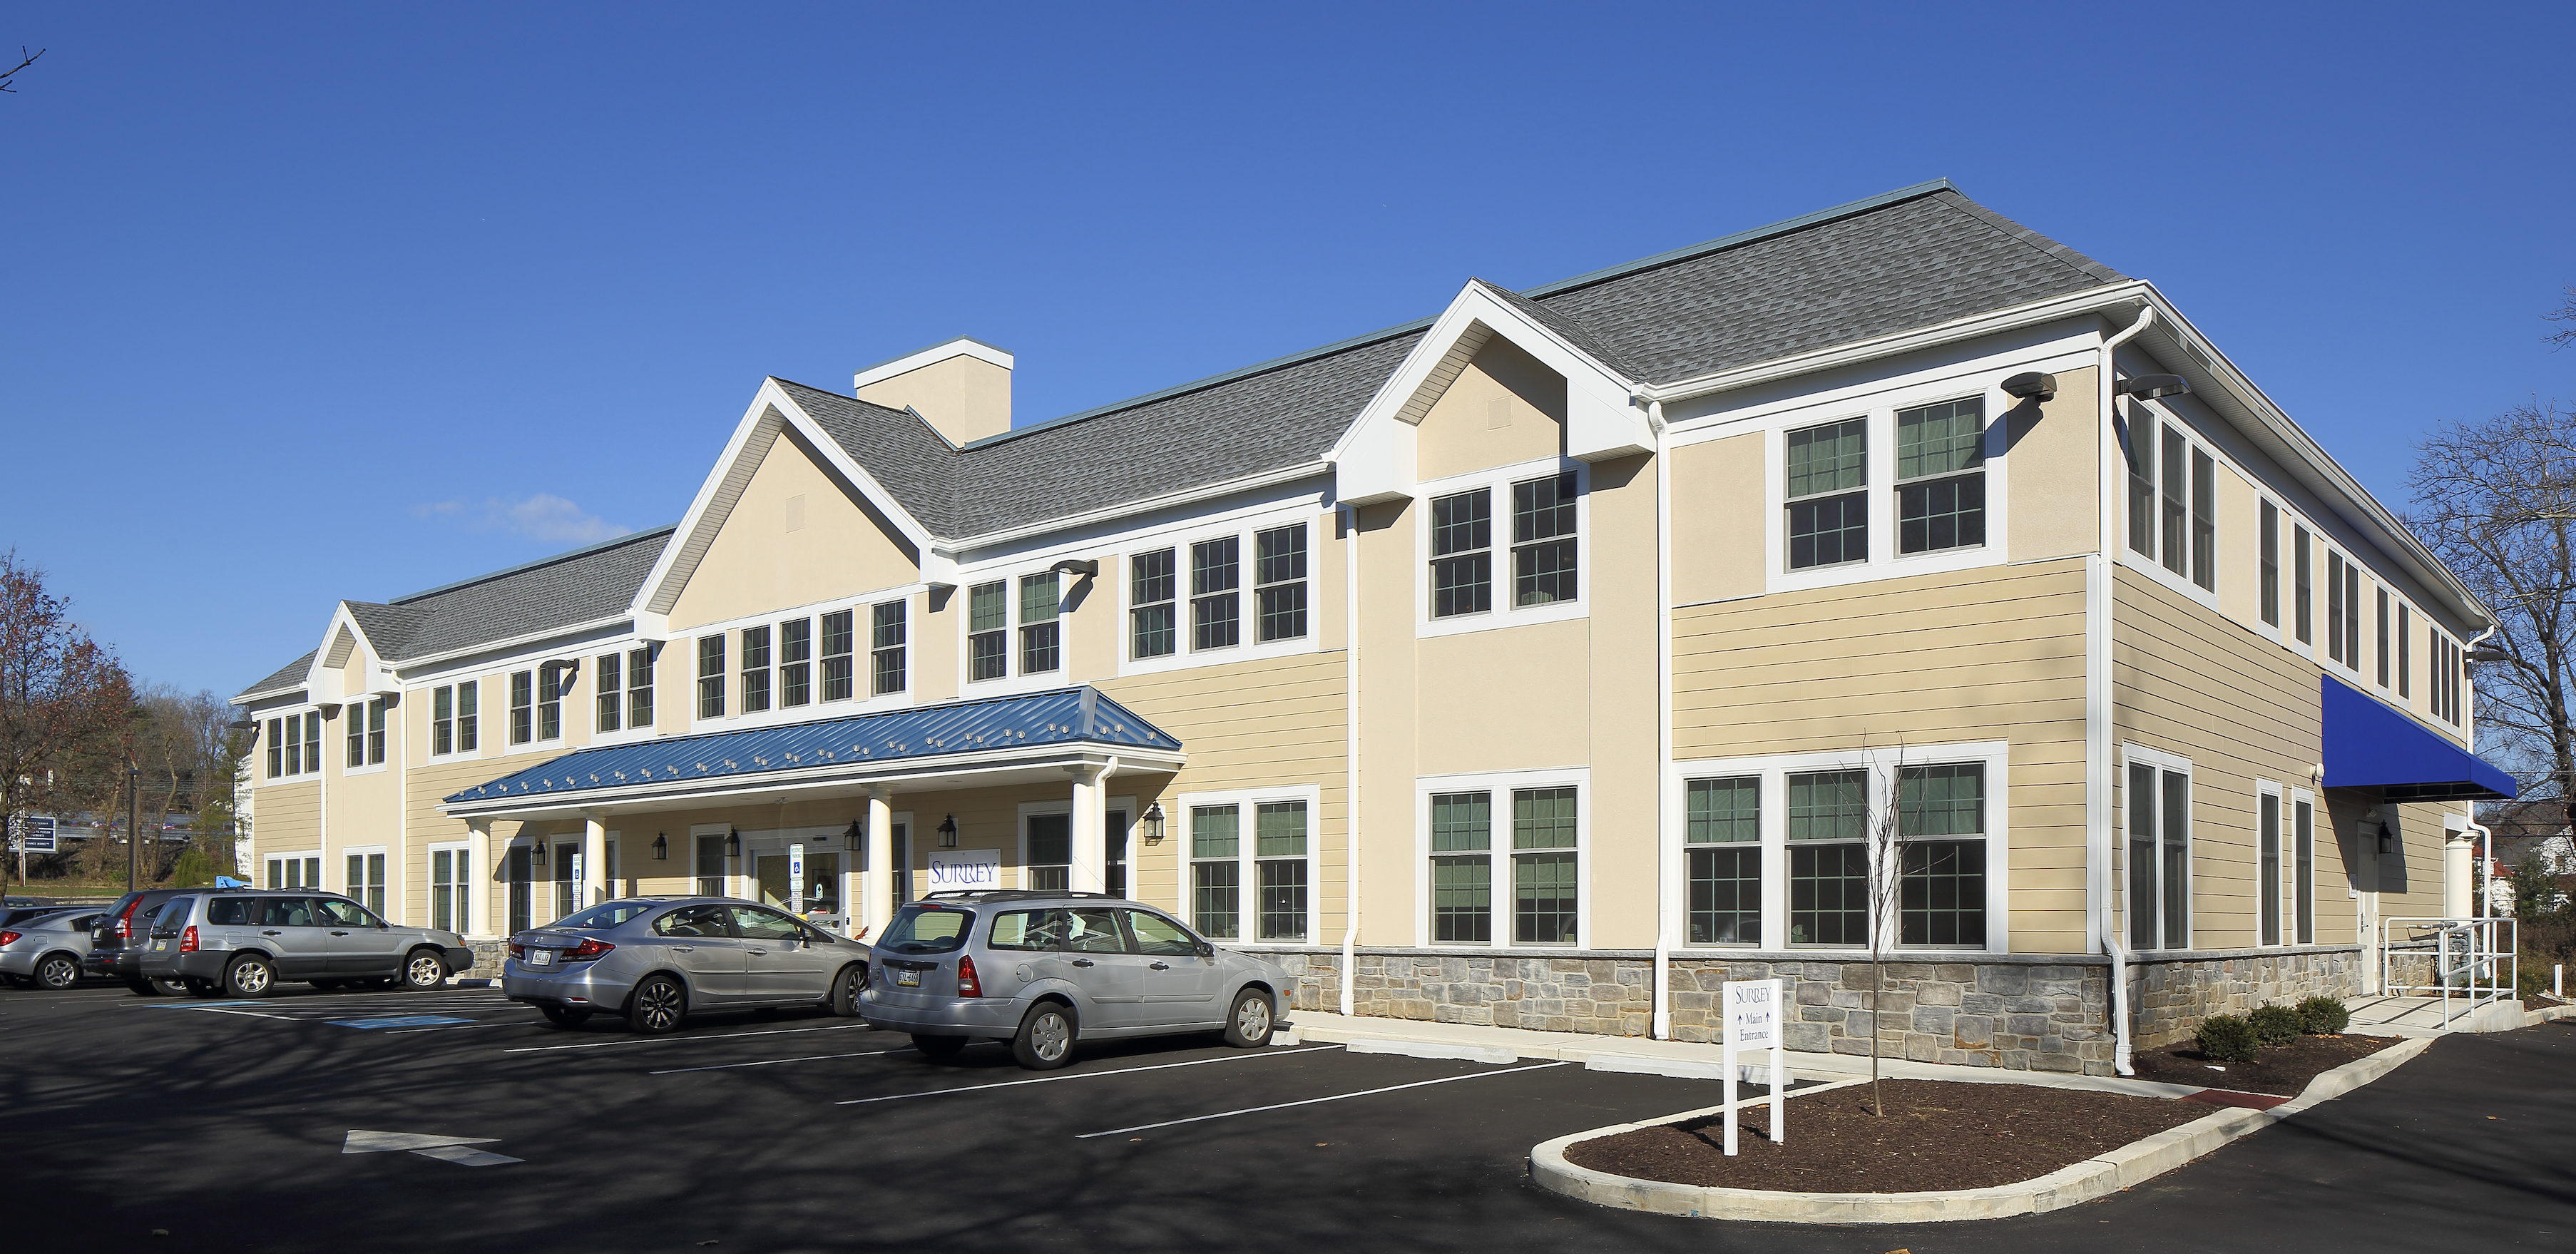 image of Surrey Services for Seniors building in Devon, PA